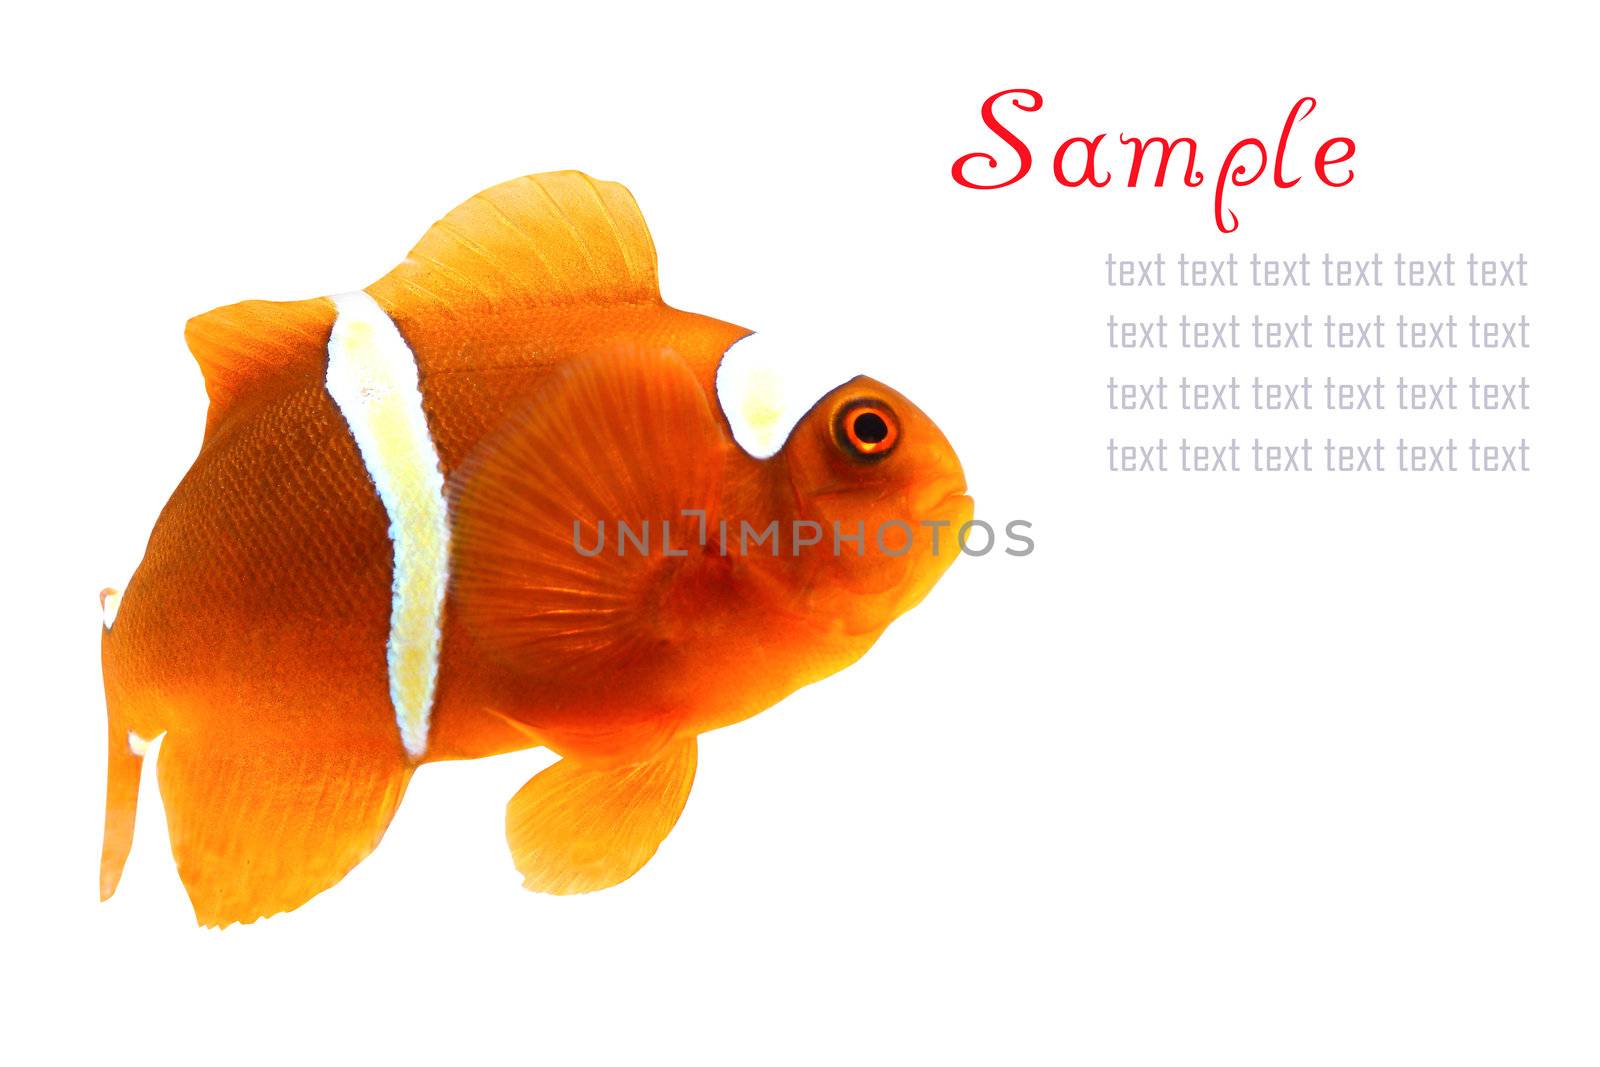 clownfish and copy space for sample text here